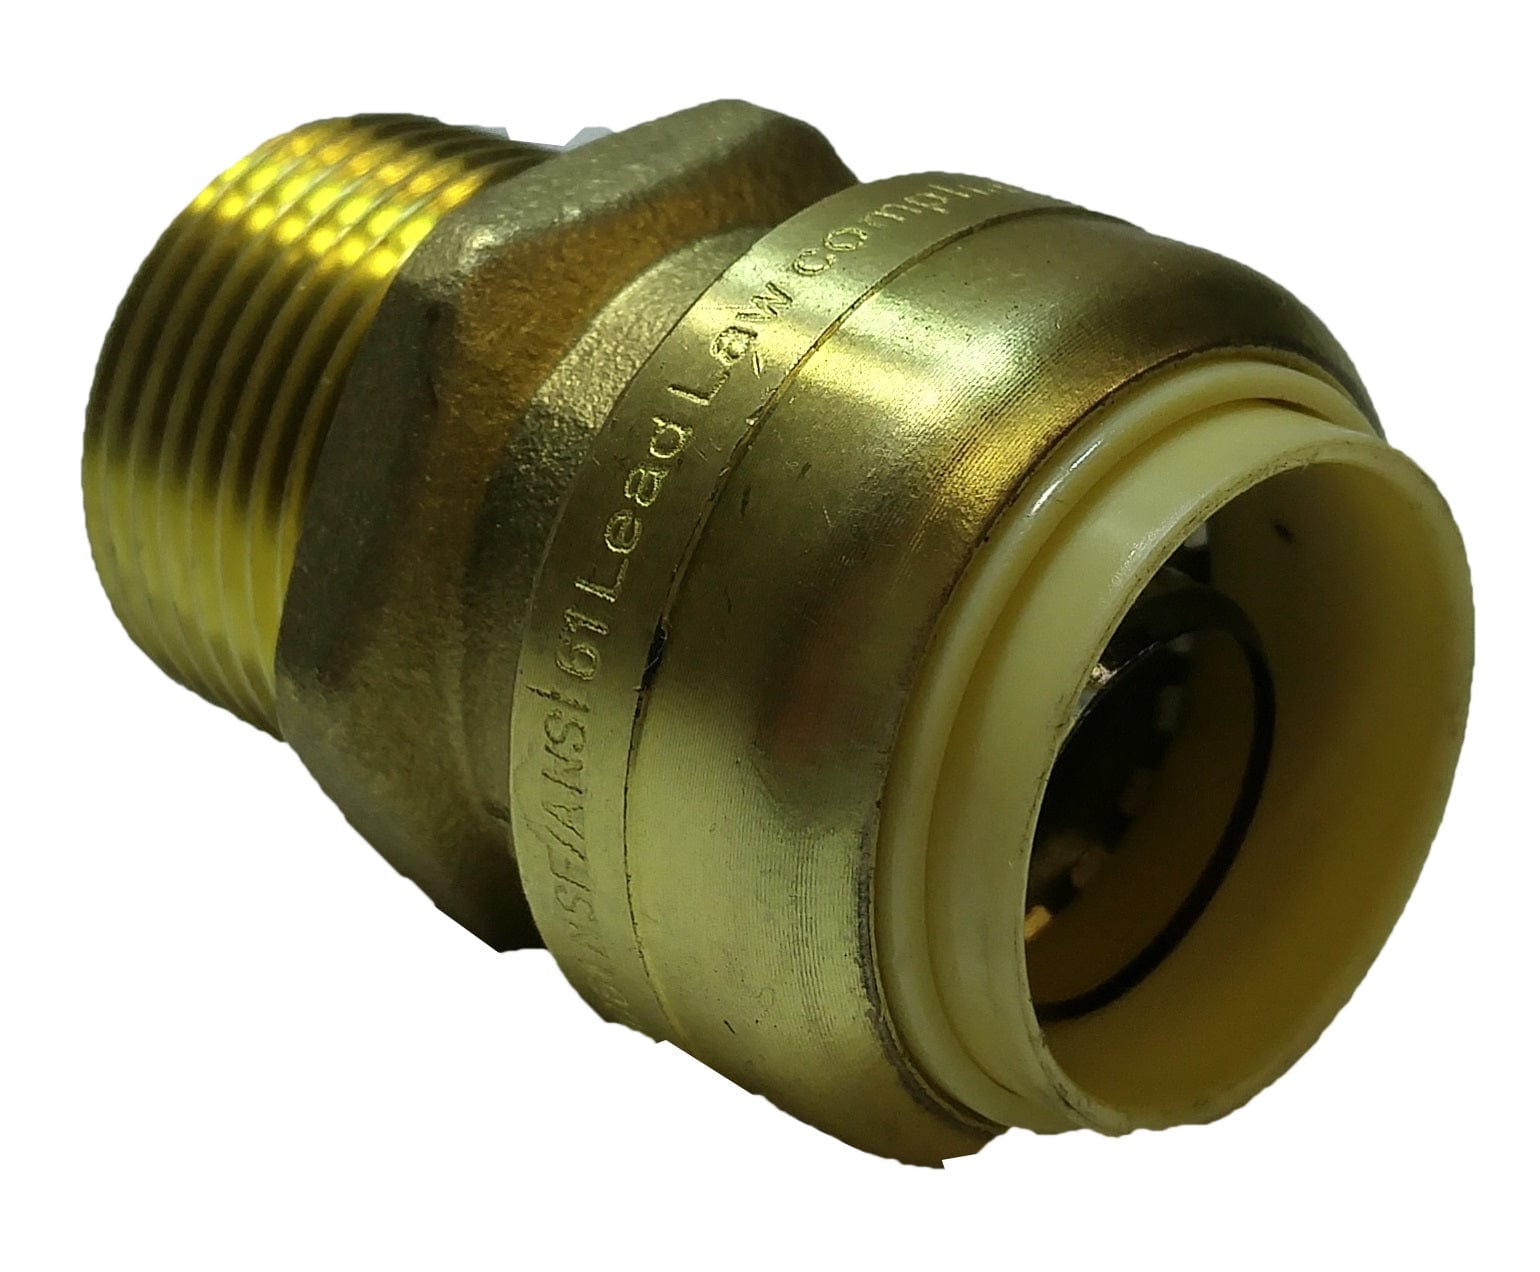 3/4" x 3/4" Push-Fit Fitting Male Adapter, Low Lead, NSF